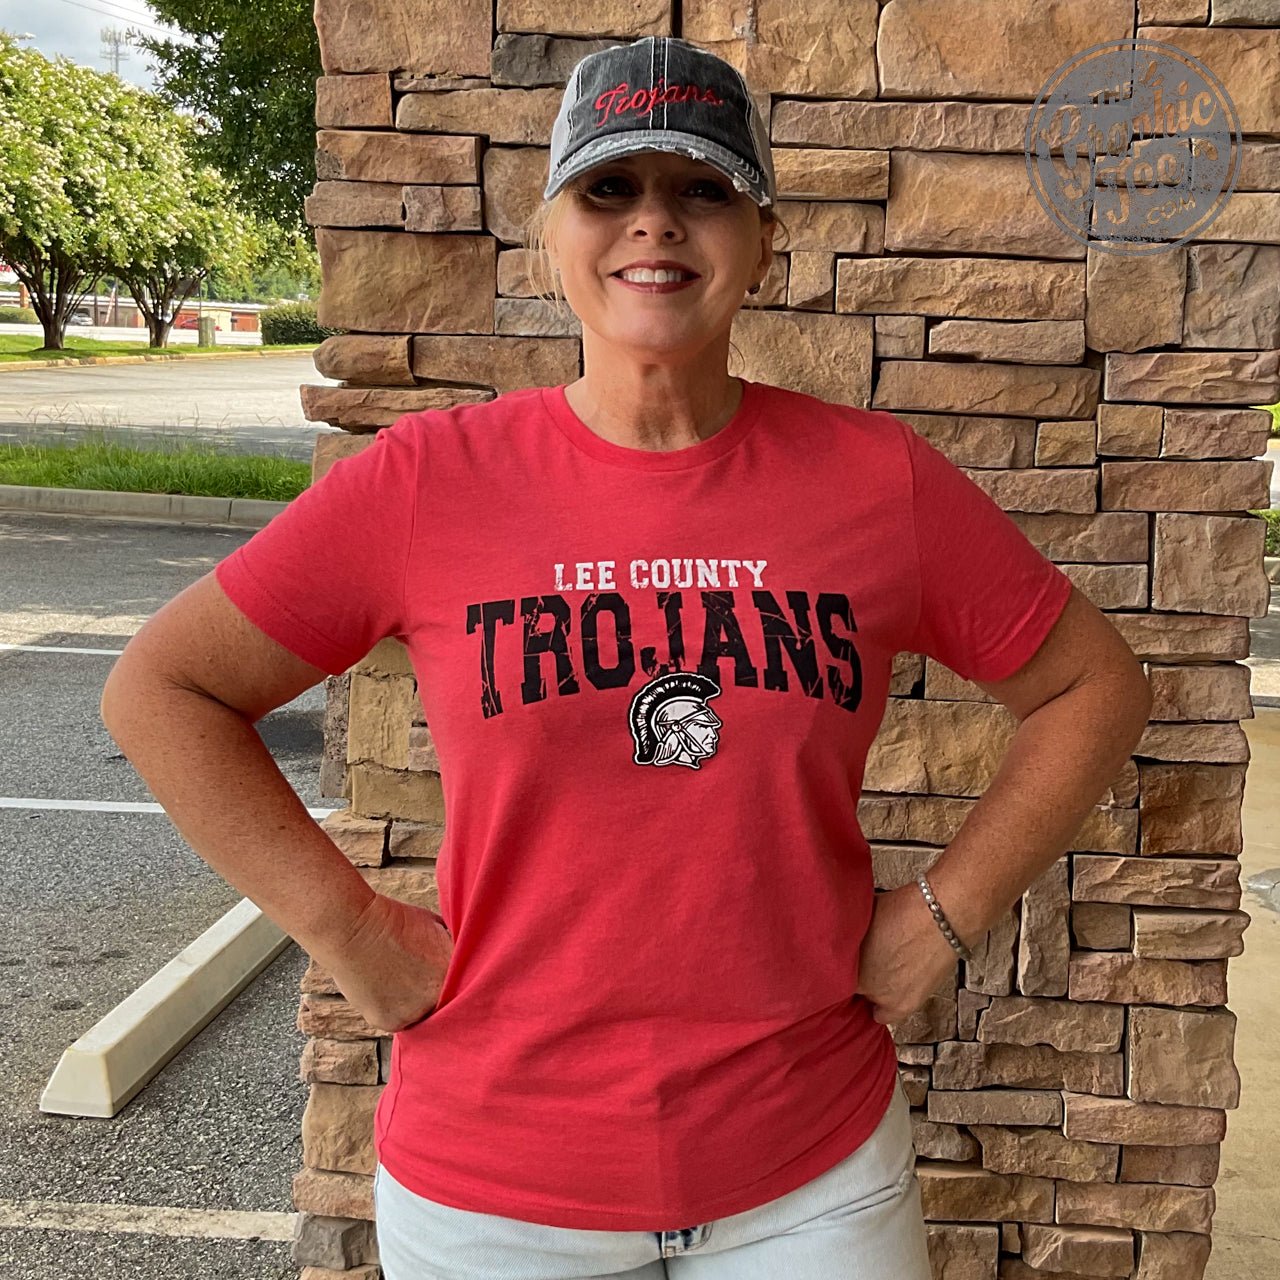 Lee County Trojans Heather Red Short Sleeve Tee - The Graphic Tee